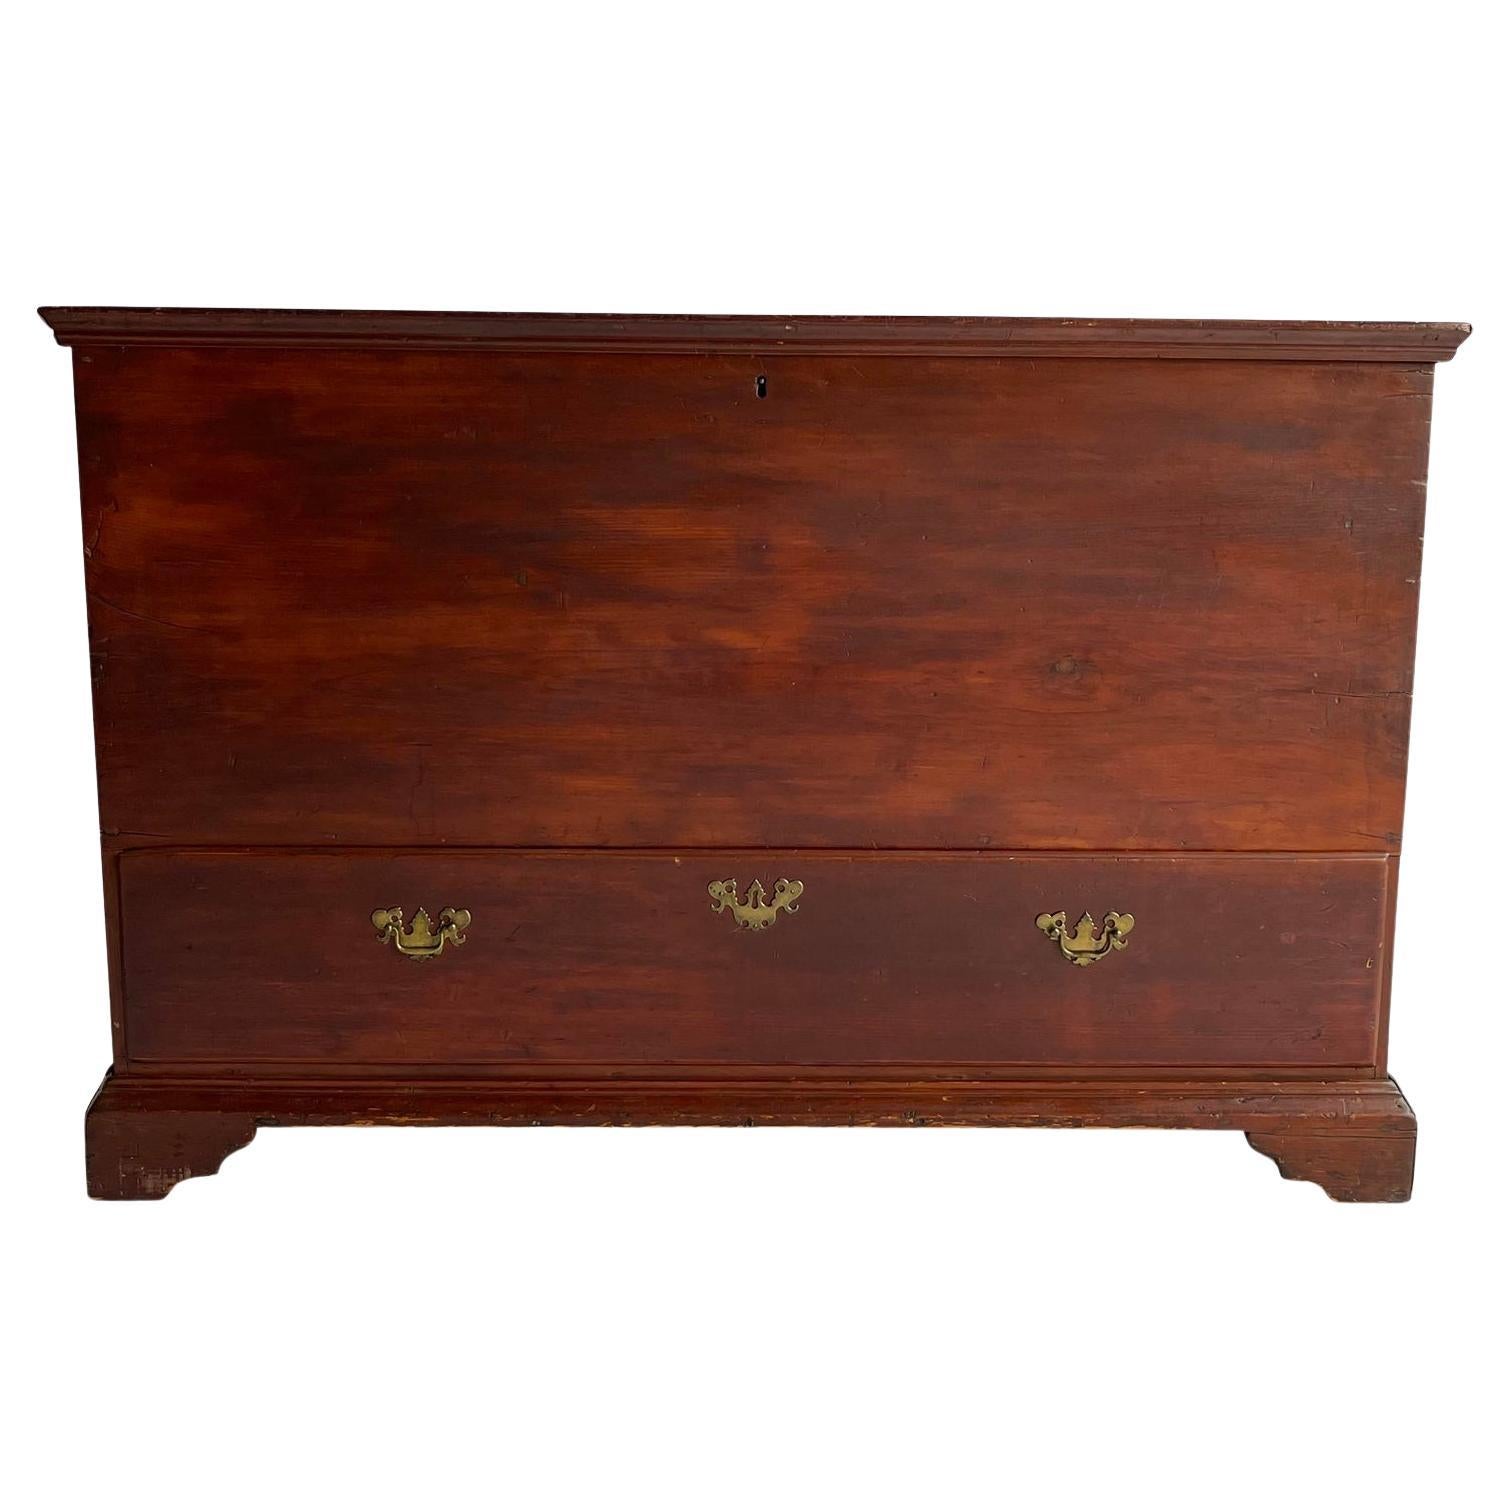 18th Century New England Country American Single Drawer Blanket Chest